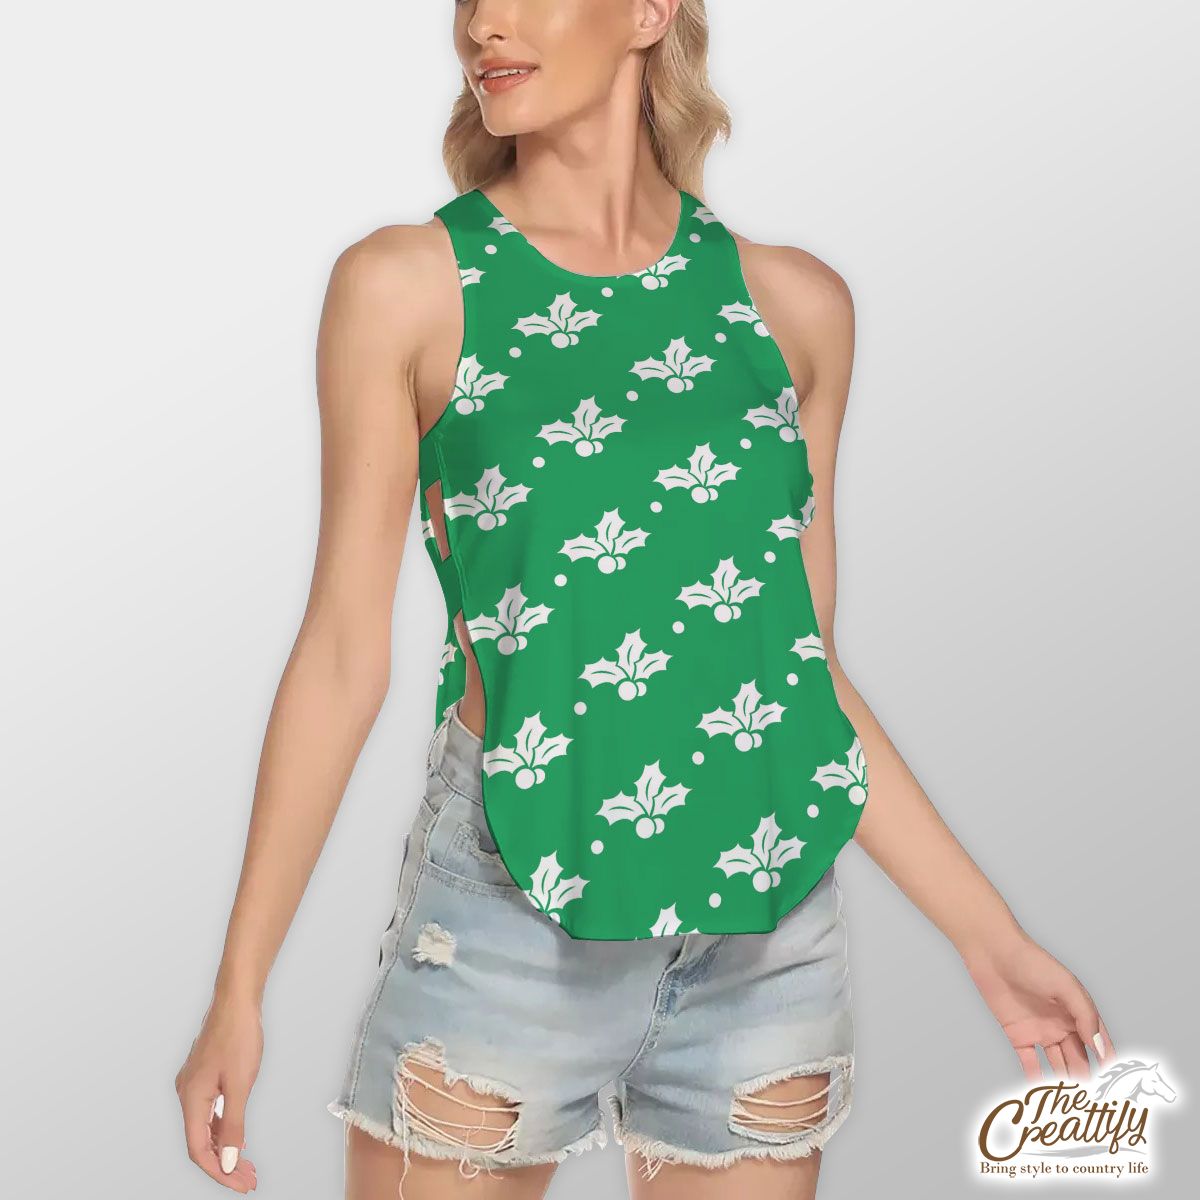 Holly Tree Pattern, Holly Leaf, American Holly Tree On Green Waist Hollow Yoga Vest